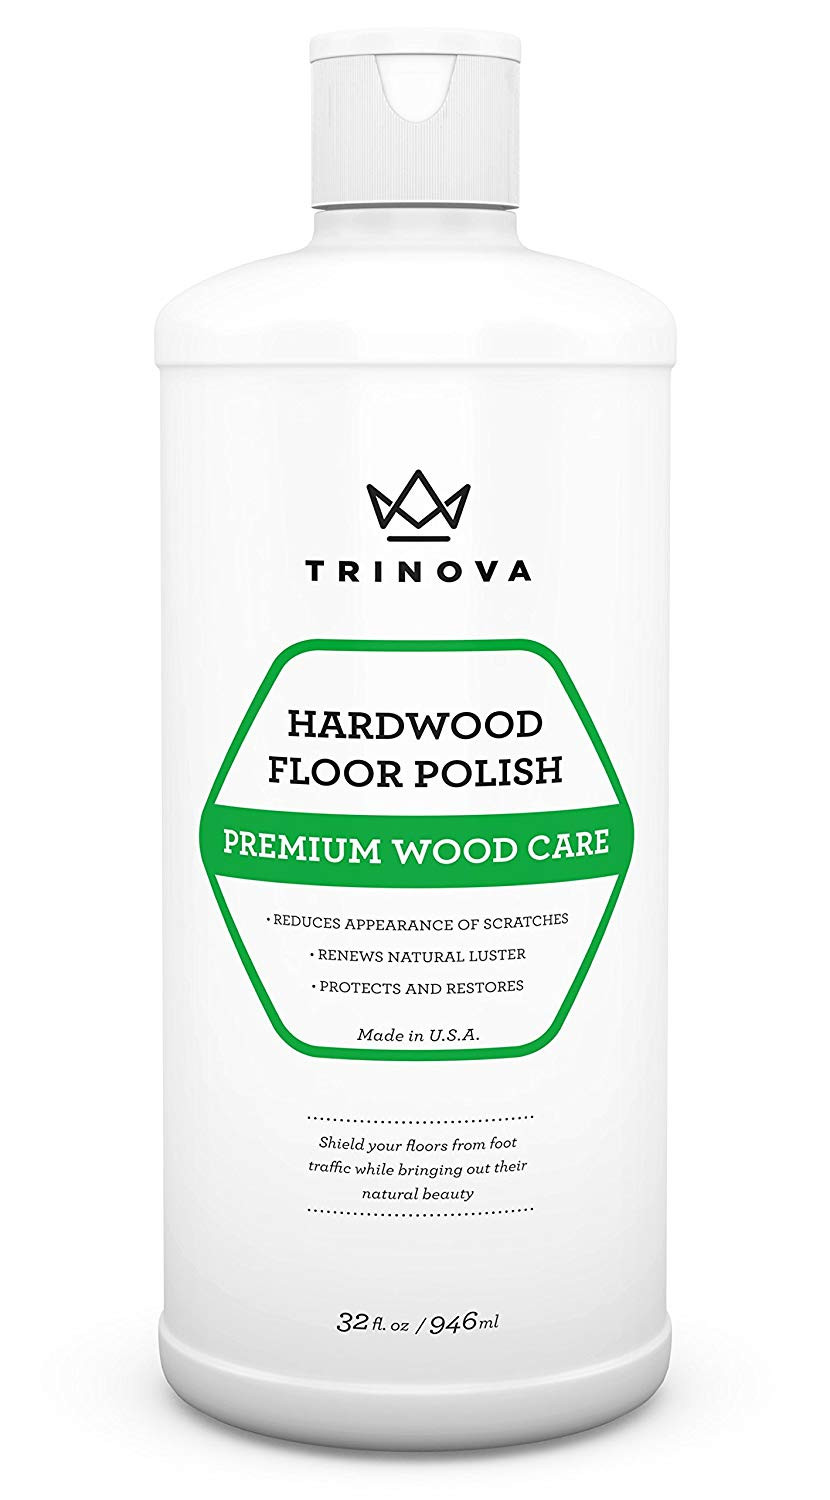 18 Unique Hardwood Floor Cleaning Machine Reviews 2024 free download hardwood floor cleaning machine reviews of amazon com trinova hardwood floor polish and restorer high gloss with amazon com trinova hardwood floor polish and restorer high gloss wax protecti